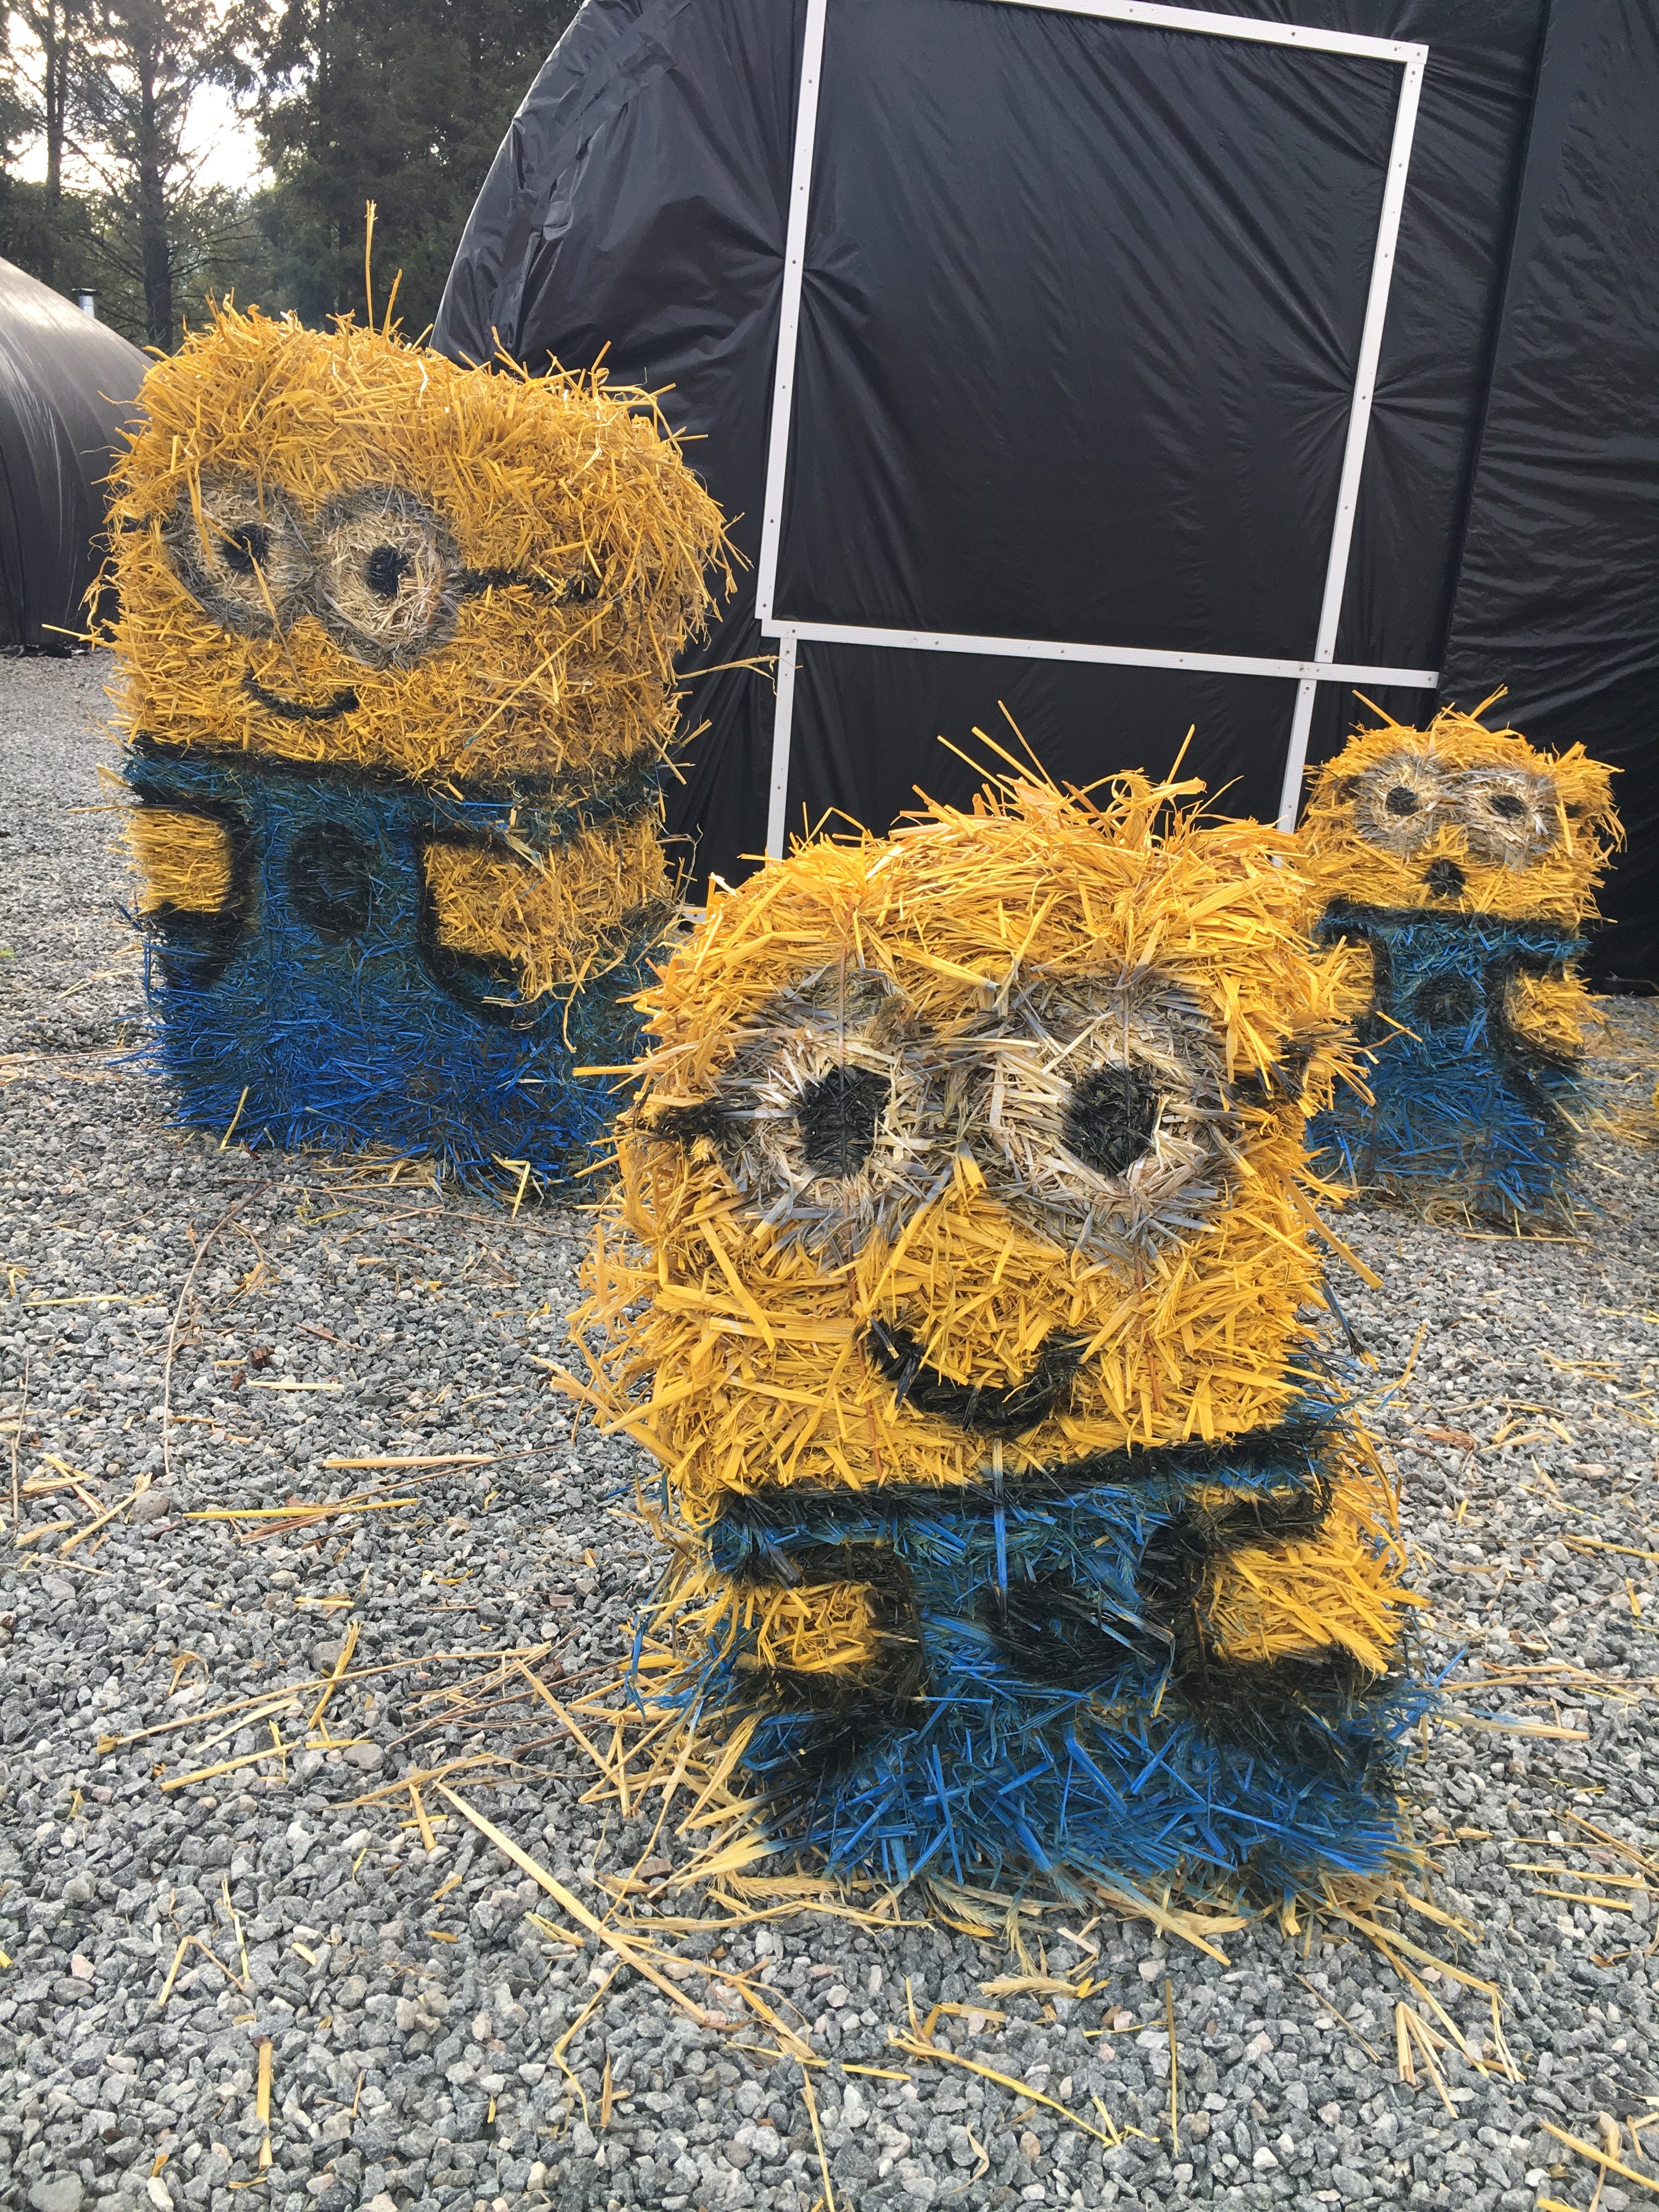 These too can be yours! Minions for sale!